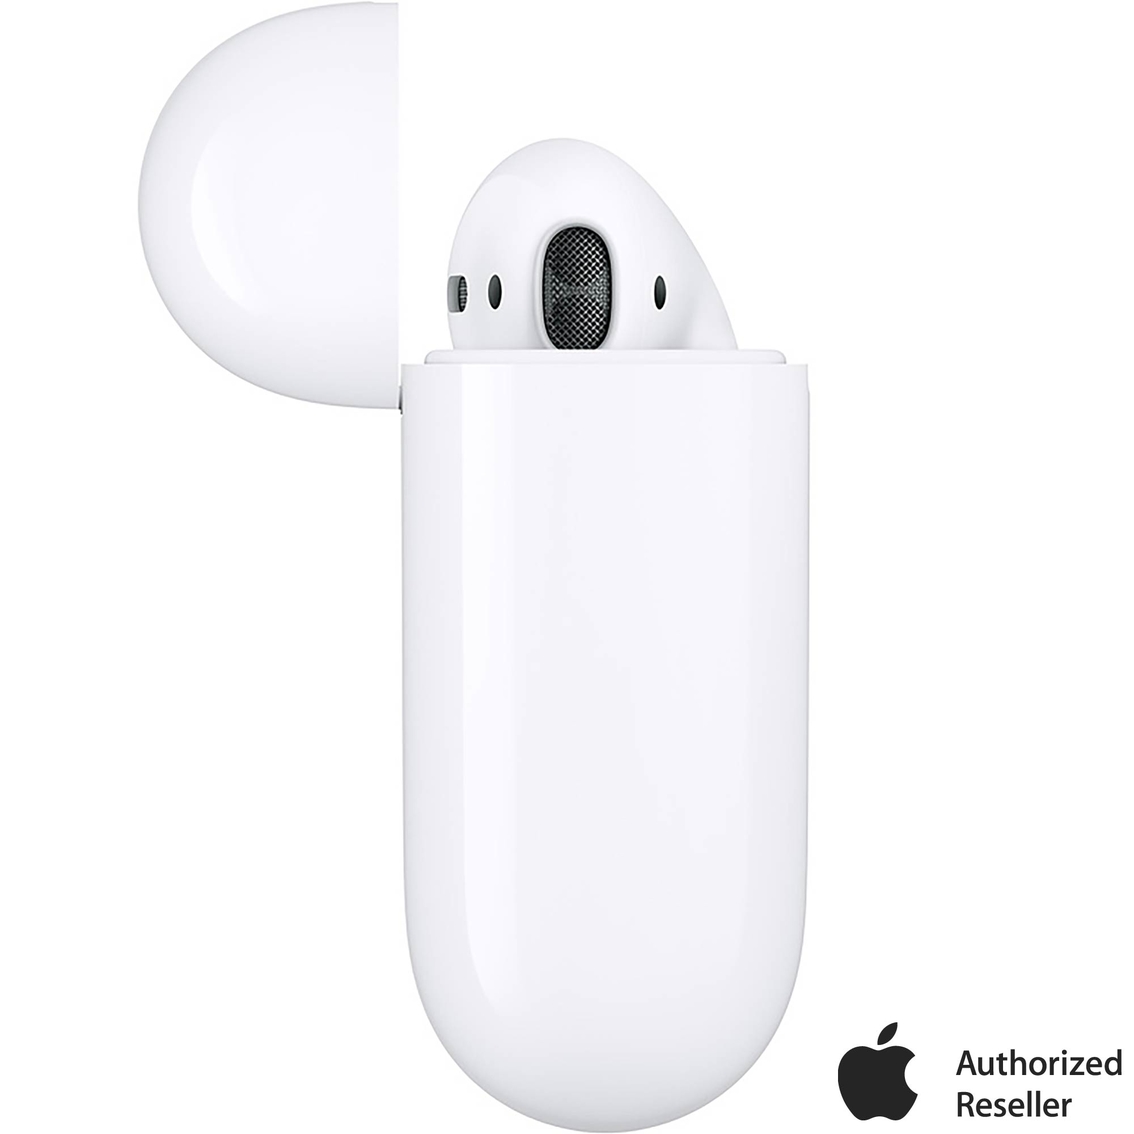 Apple AirPods with Charging Case - Image 4 of 5